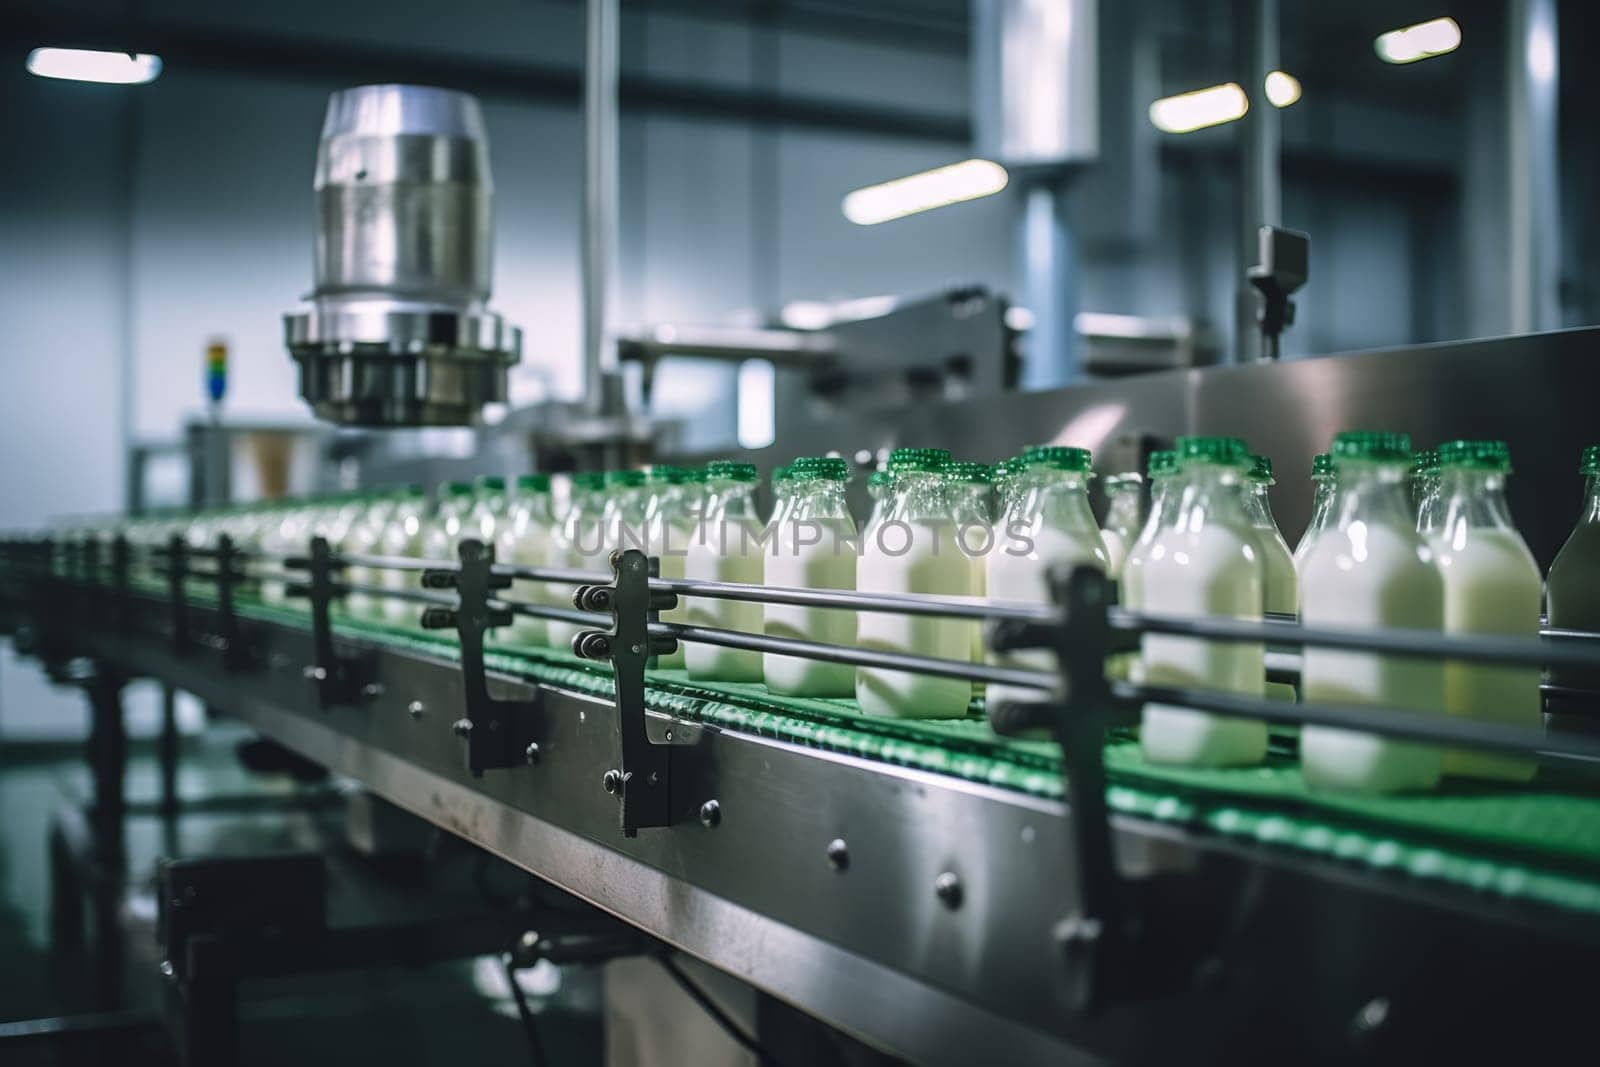 Industrial image of a dairy plant production line with a row of green-capped milk bottles on a conveyor, depicting food industry efficiency